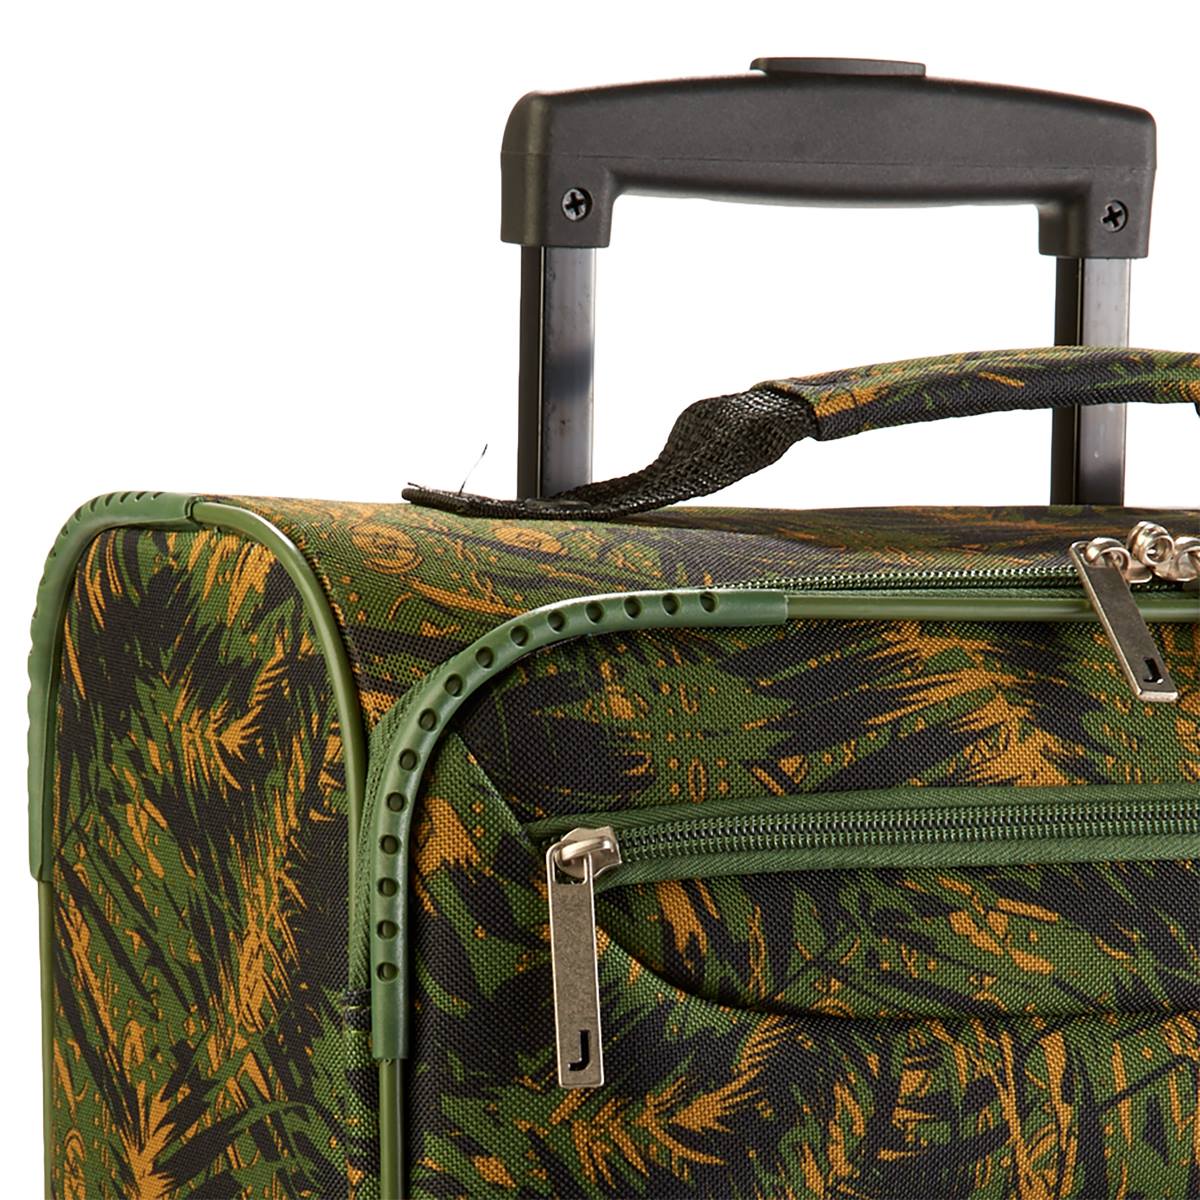 Jetstream 20in. Softside Carry-On Spinner Luggage - Olive